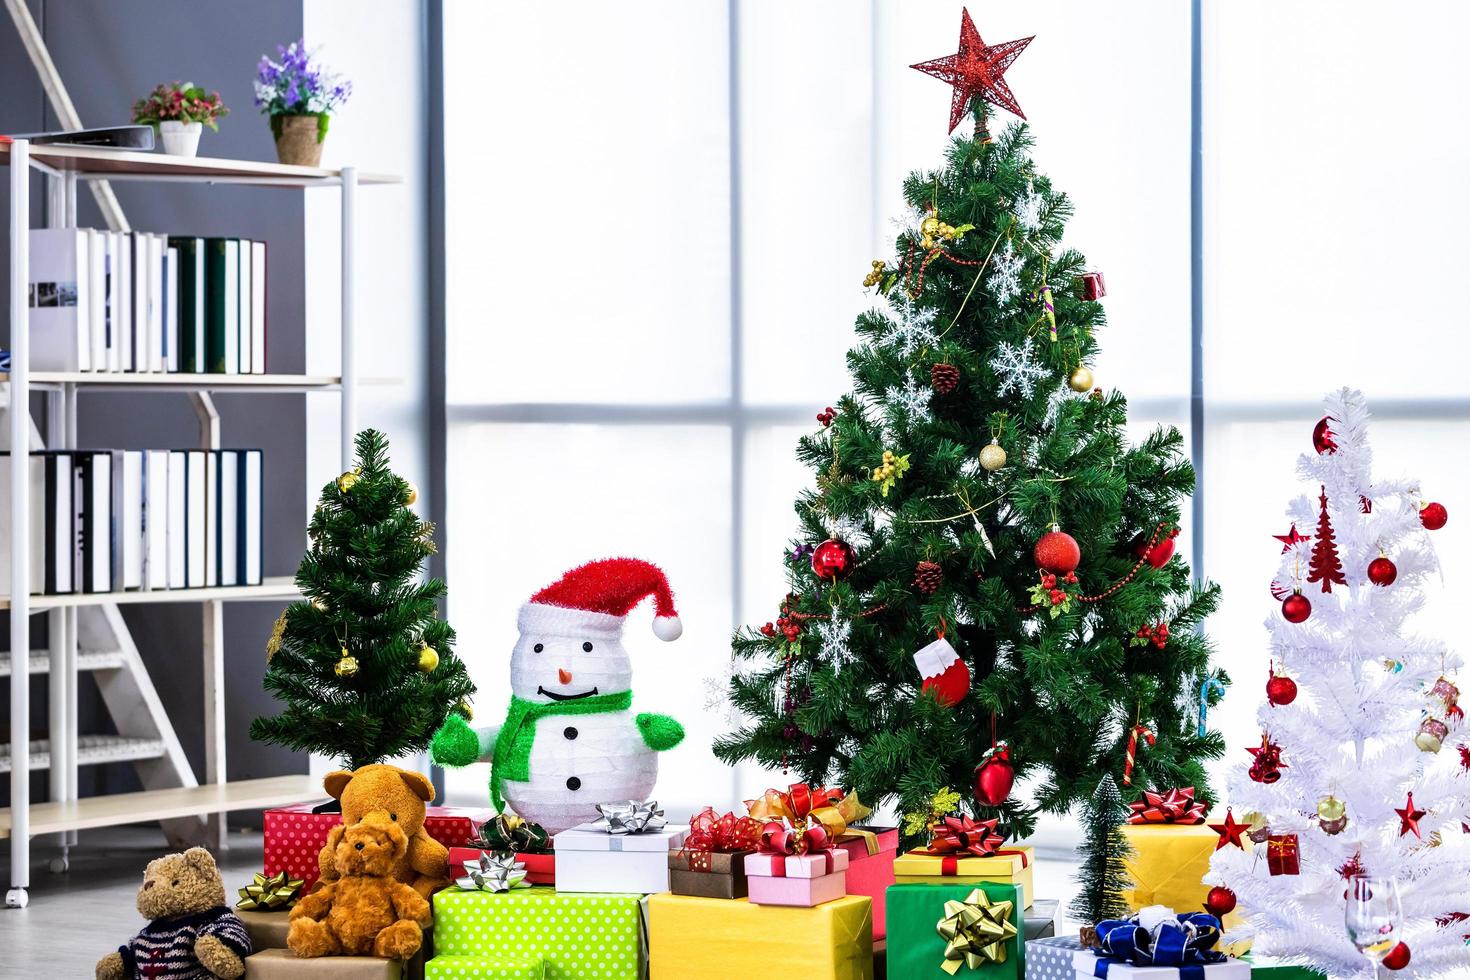 Christmas tree with gifts photo